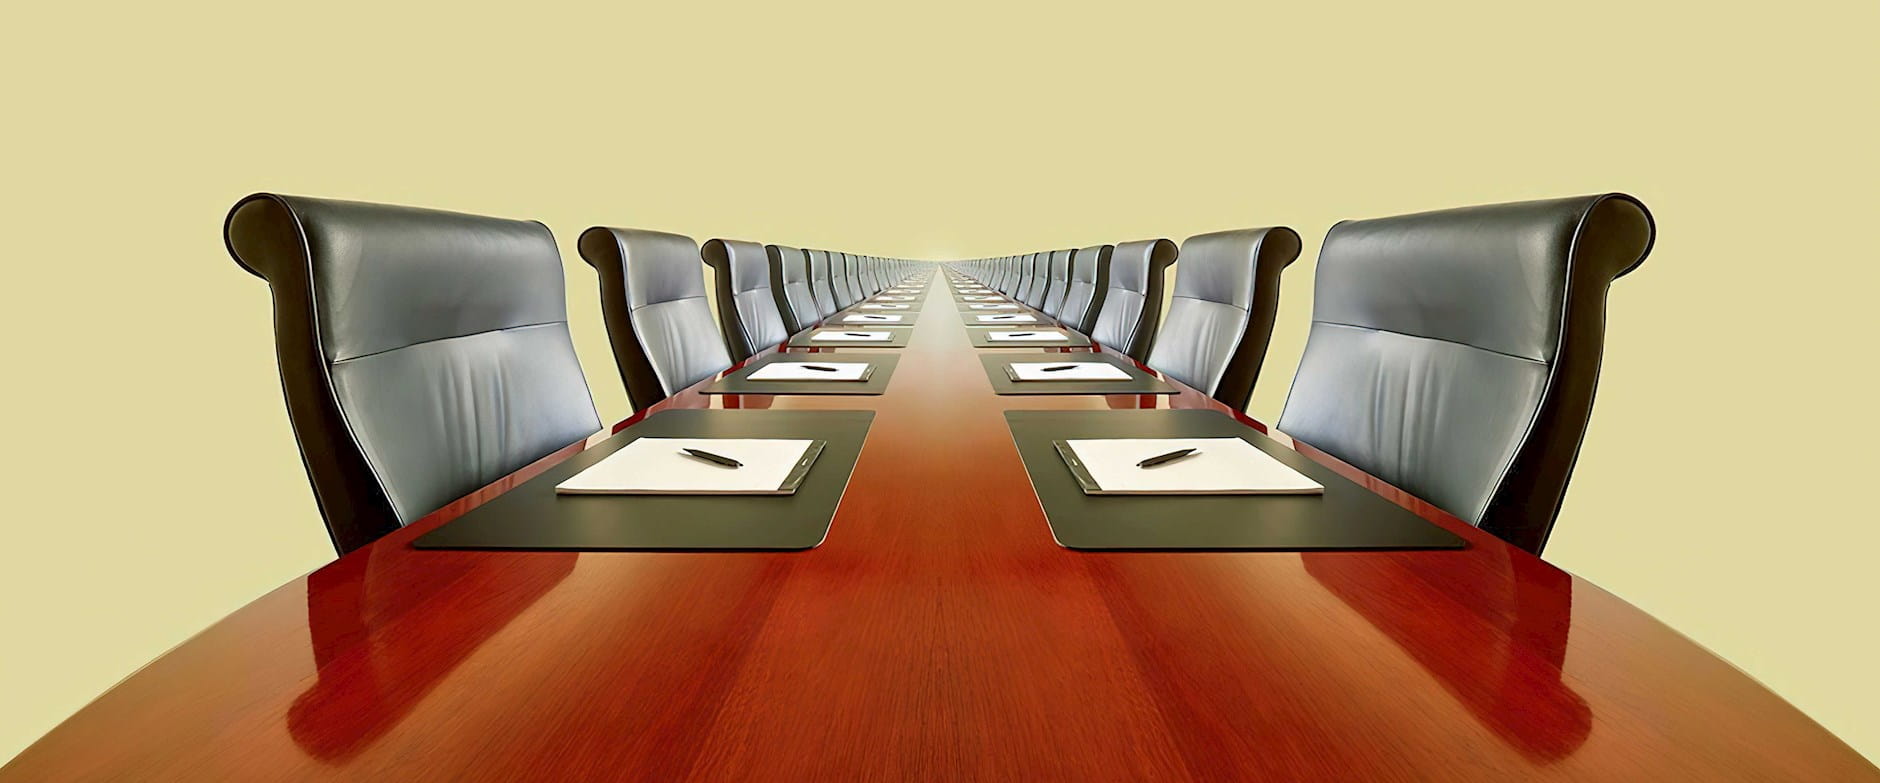 Boardroom table with leather chairs